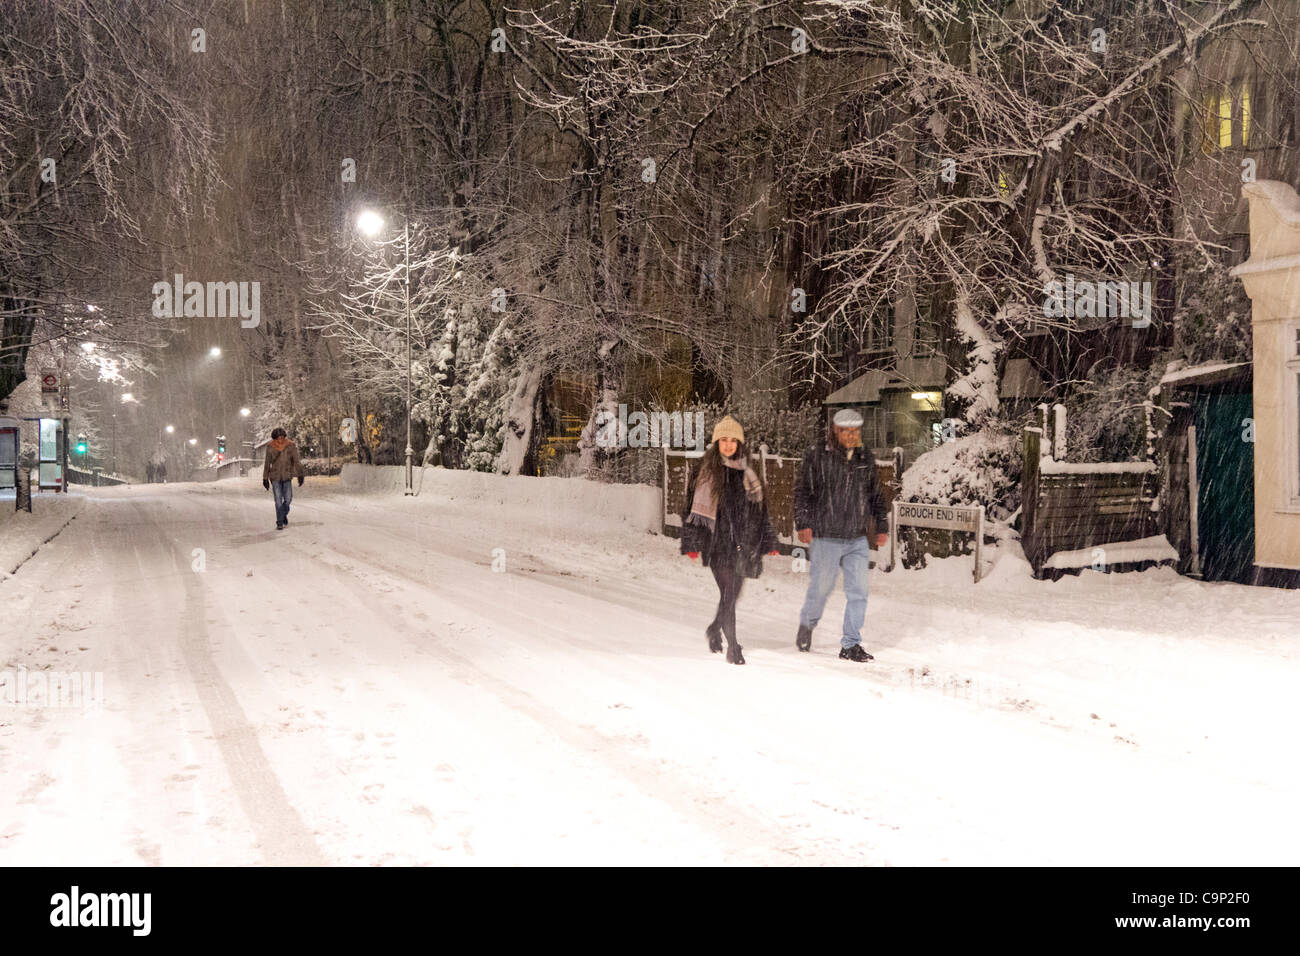 London, UK. 5th Feb, 2012. Couple walking down deserted road during winter storm - Crouch End - London - in the early hours of Sunday morning. Stock Photo